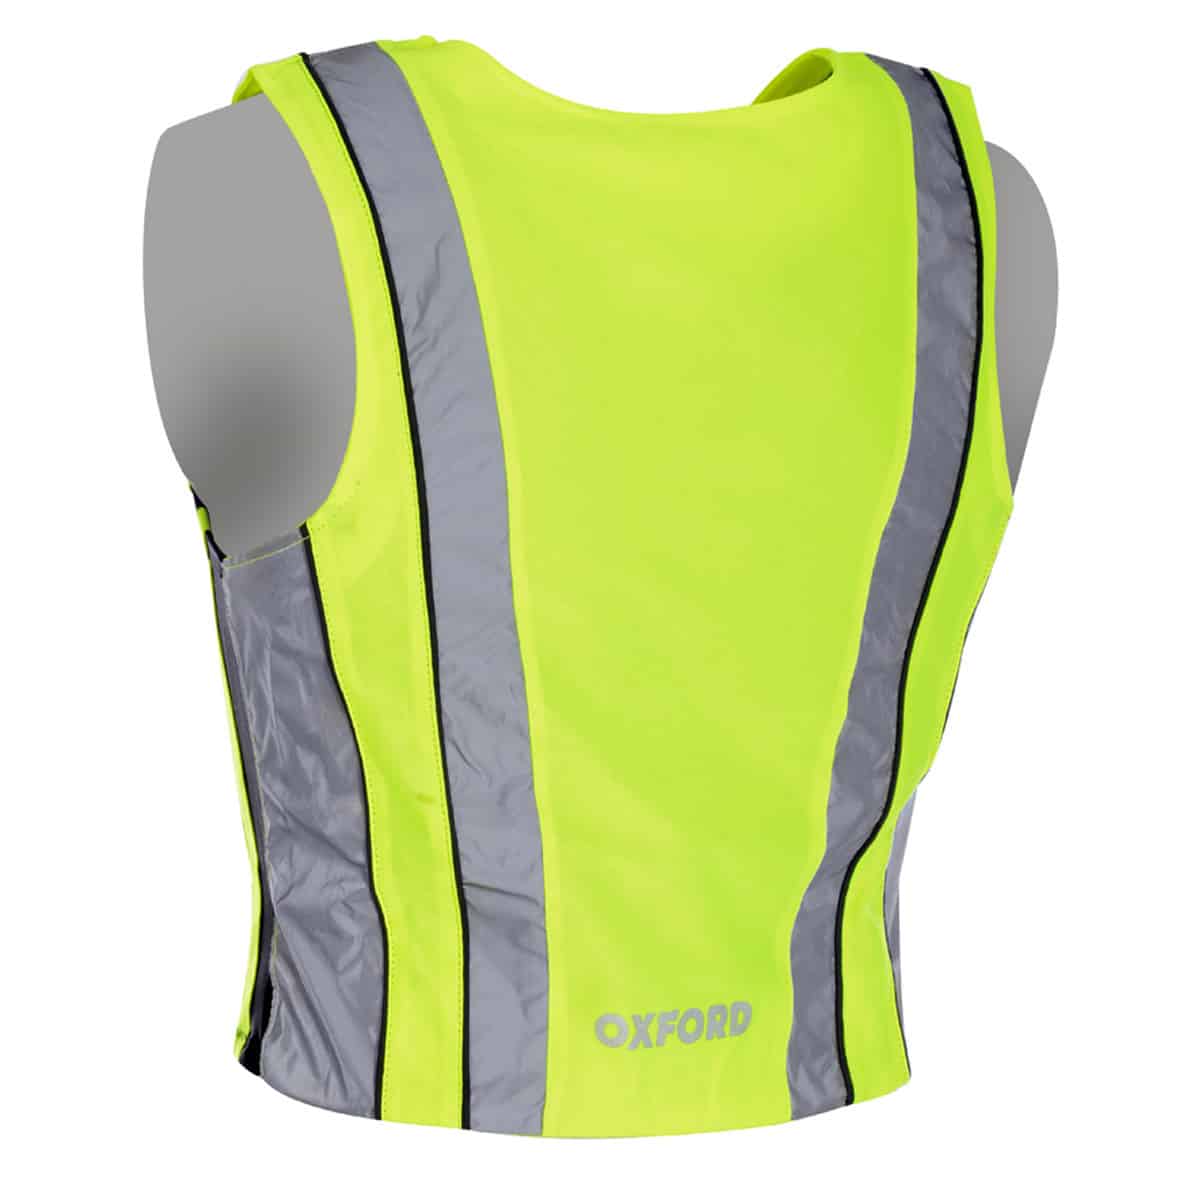 High visibility jacket vest for outdoor activities back